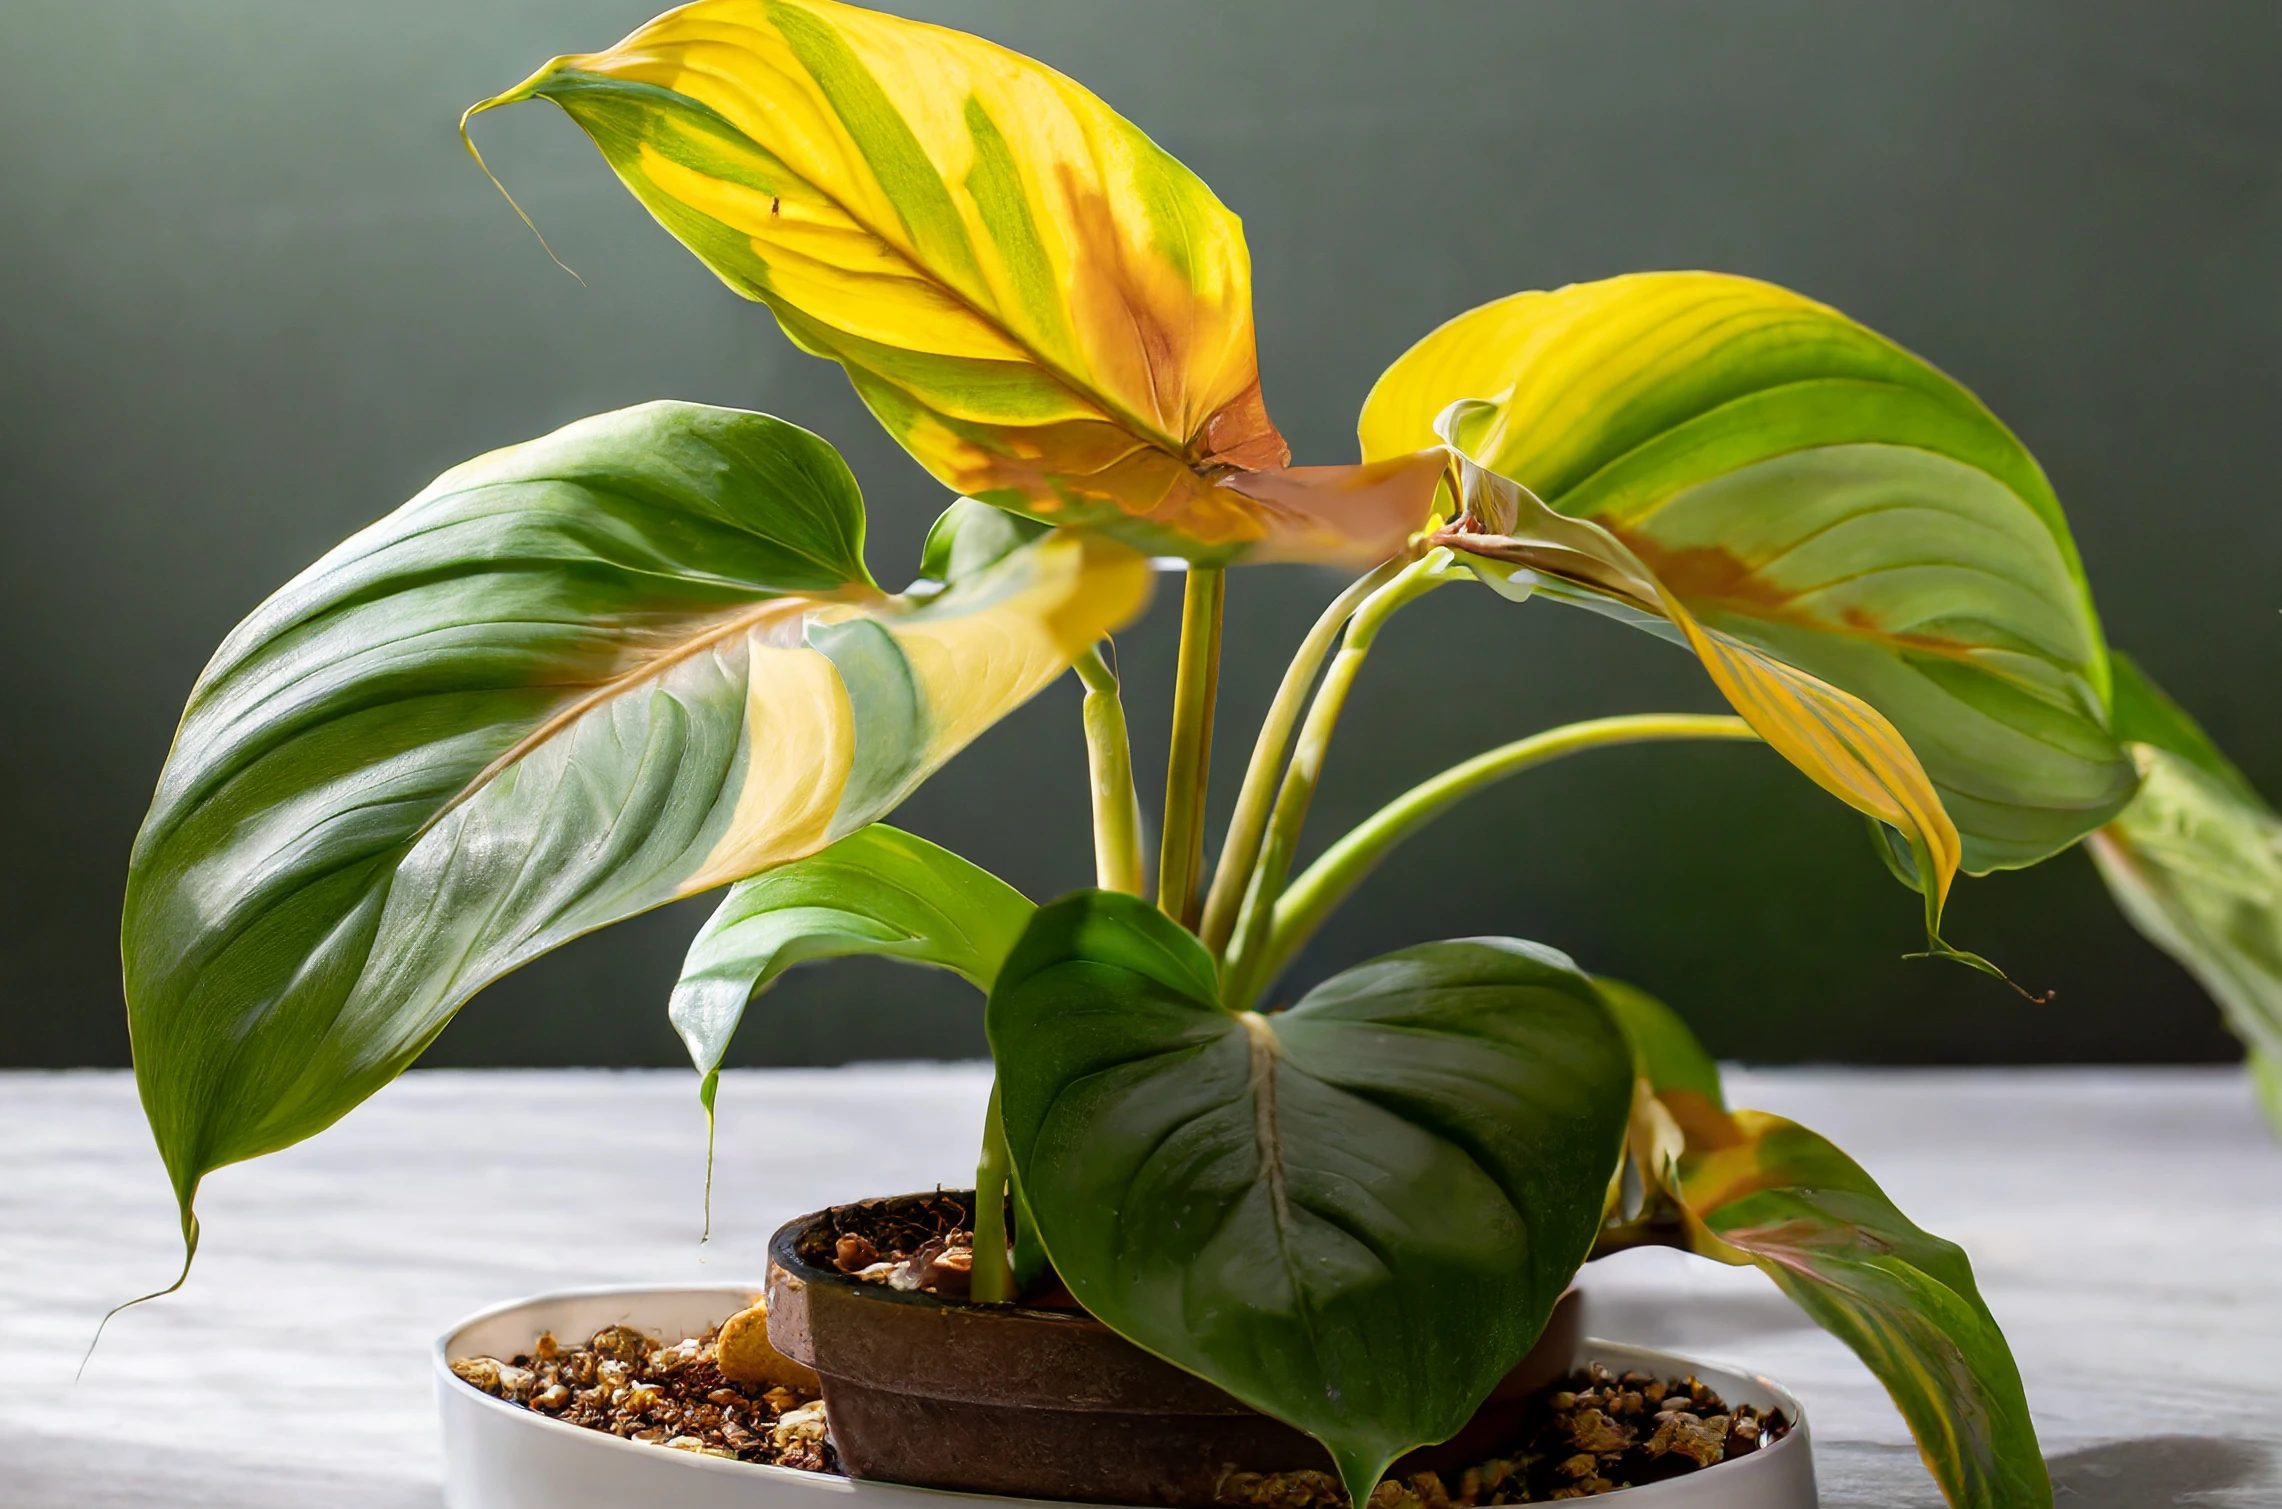 philodendron plant with yellow leaves due to Nutrient Deficiency